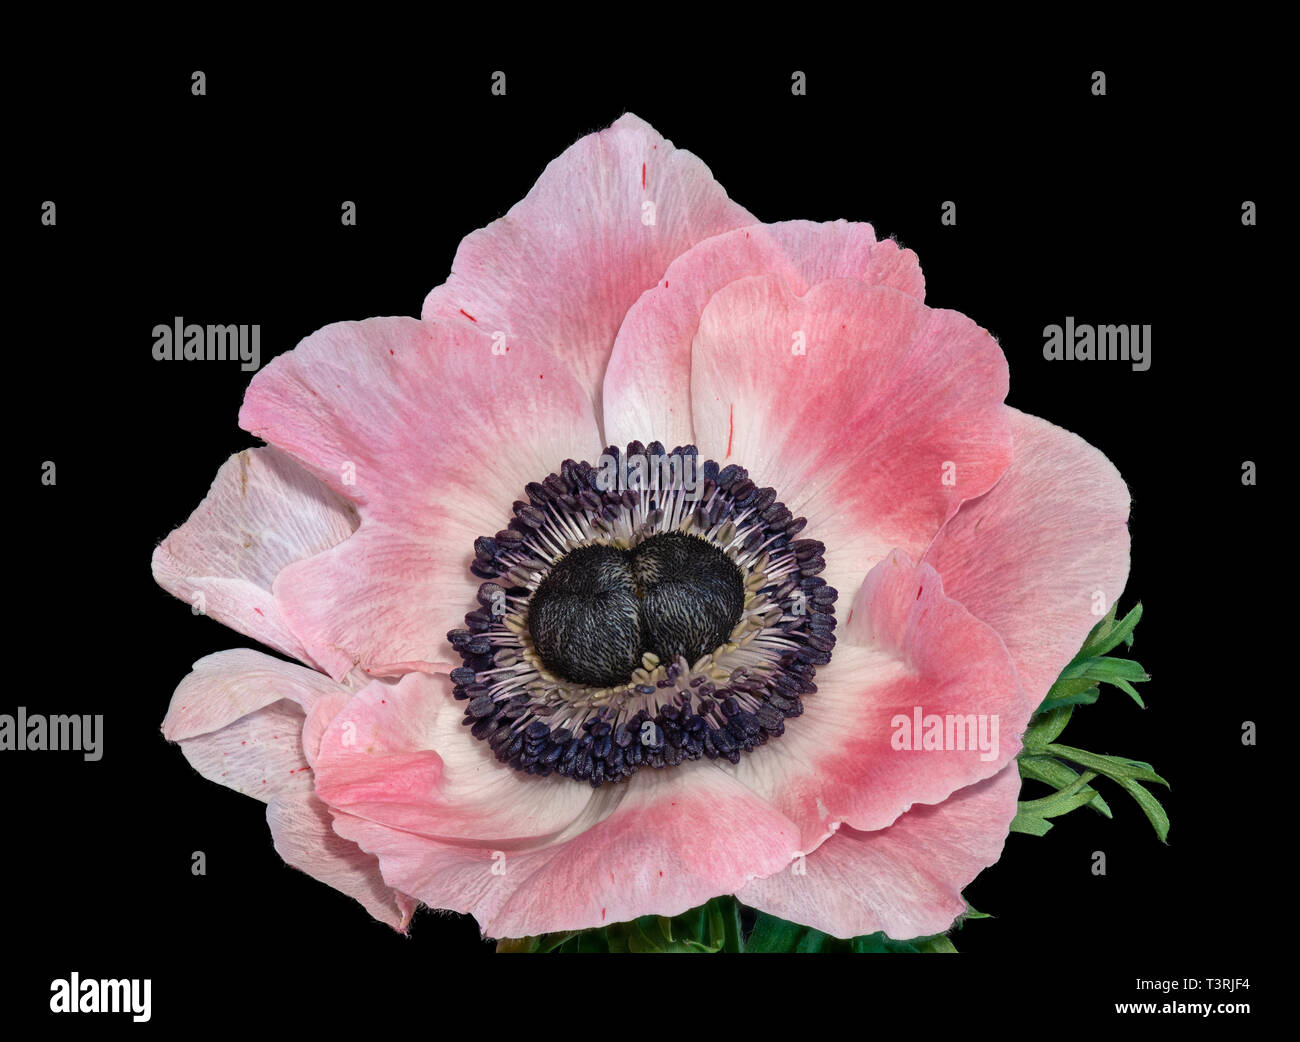 Fine art still life floral macro of a single isolated wide open bright white pink blue anemone blossom with green leaves, detailed texture on black Stock Photo